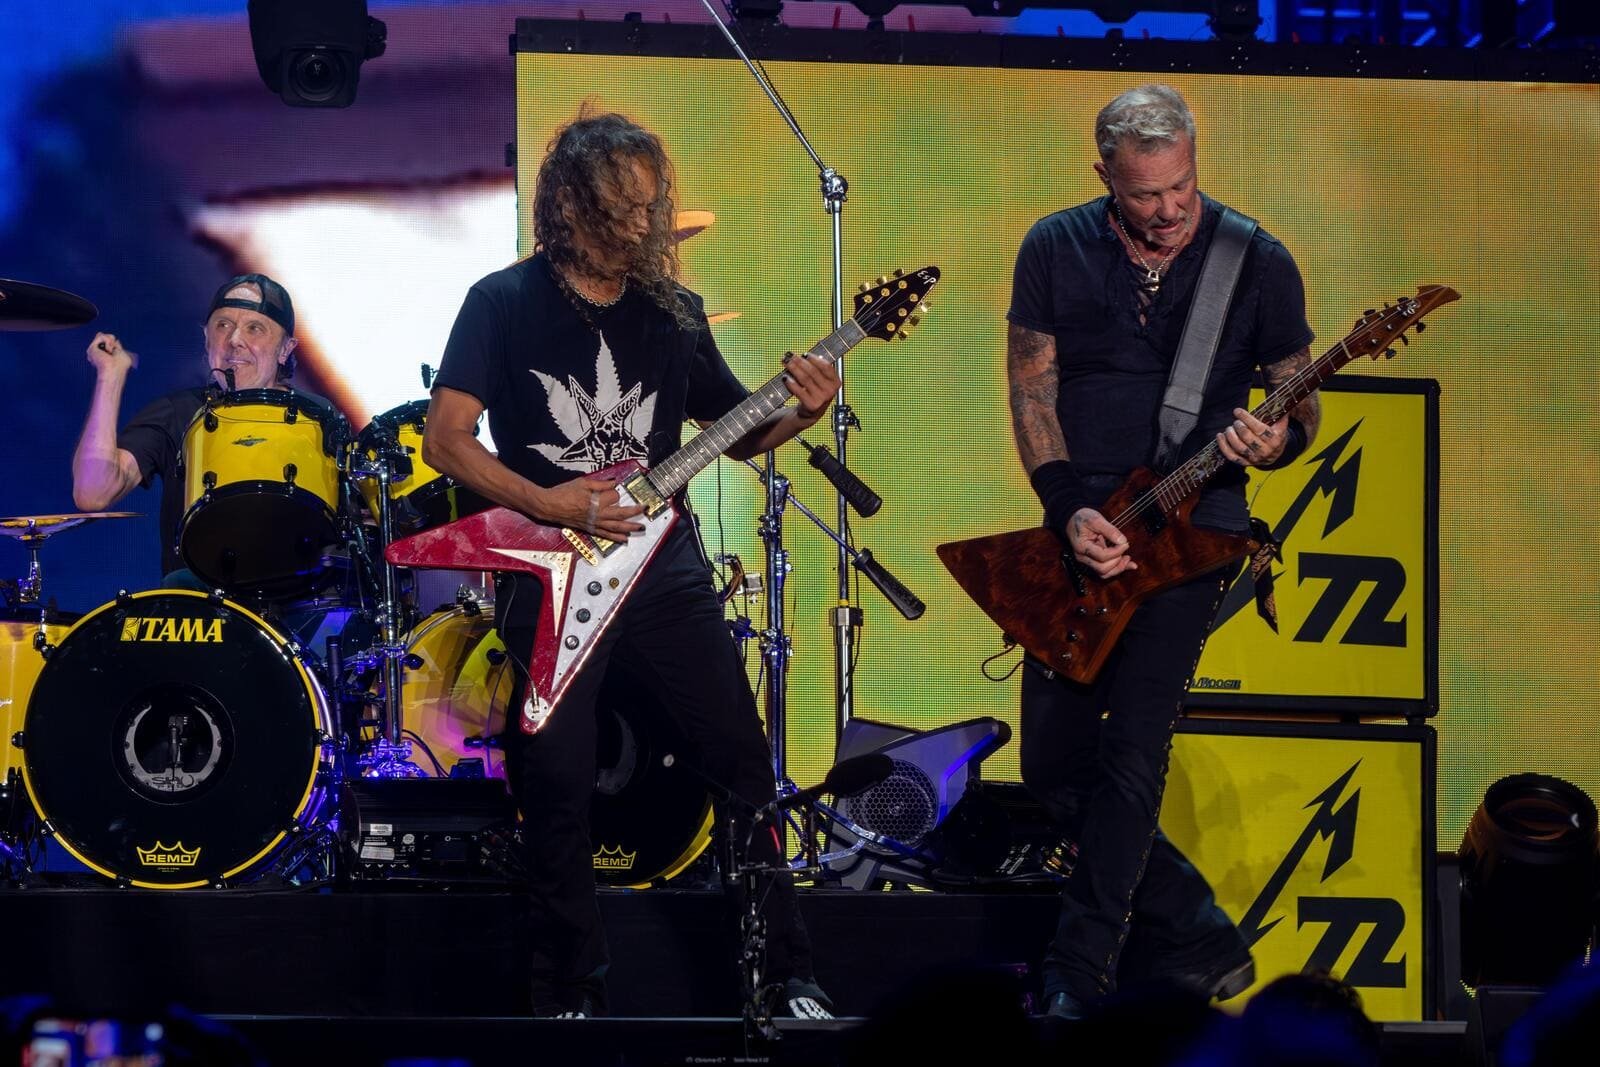 How Metallica Survives From Switching Their FX System, Technician Opens Up…